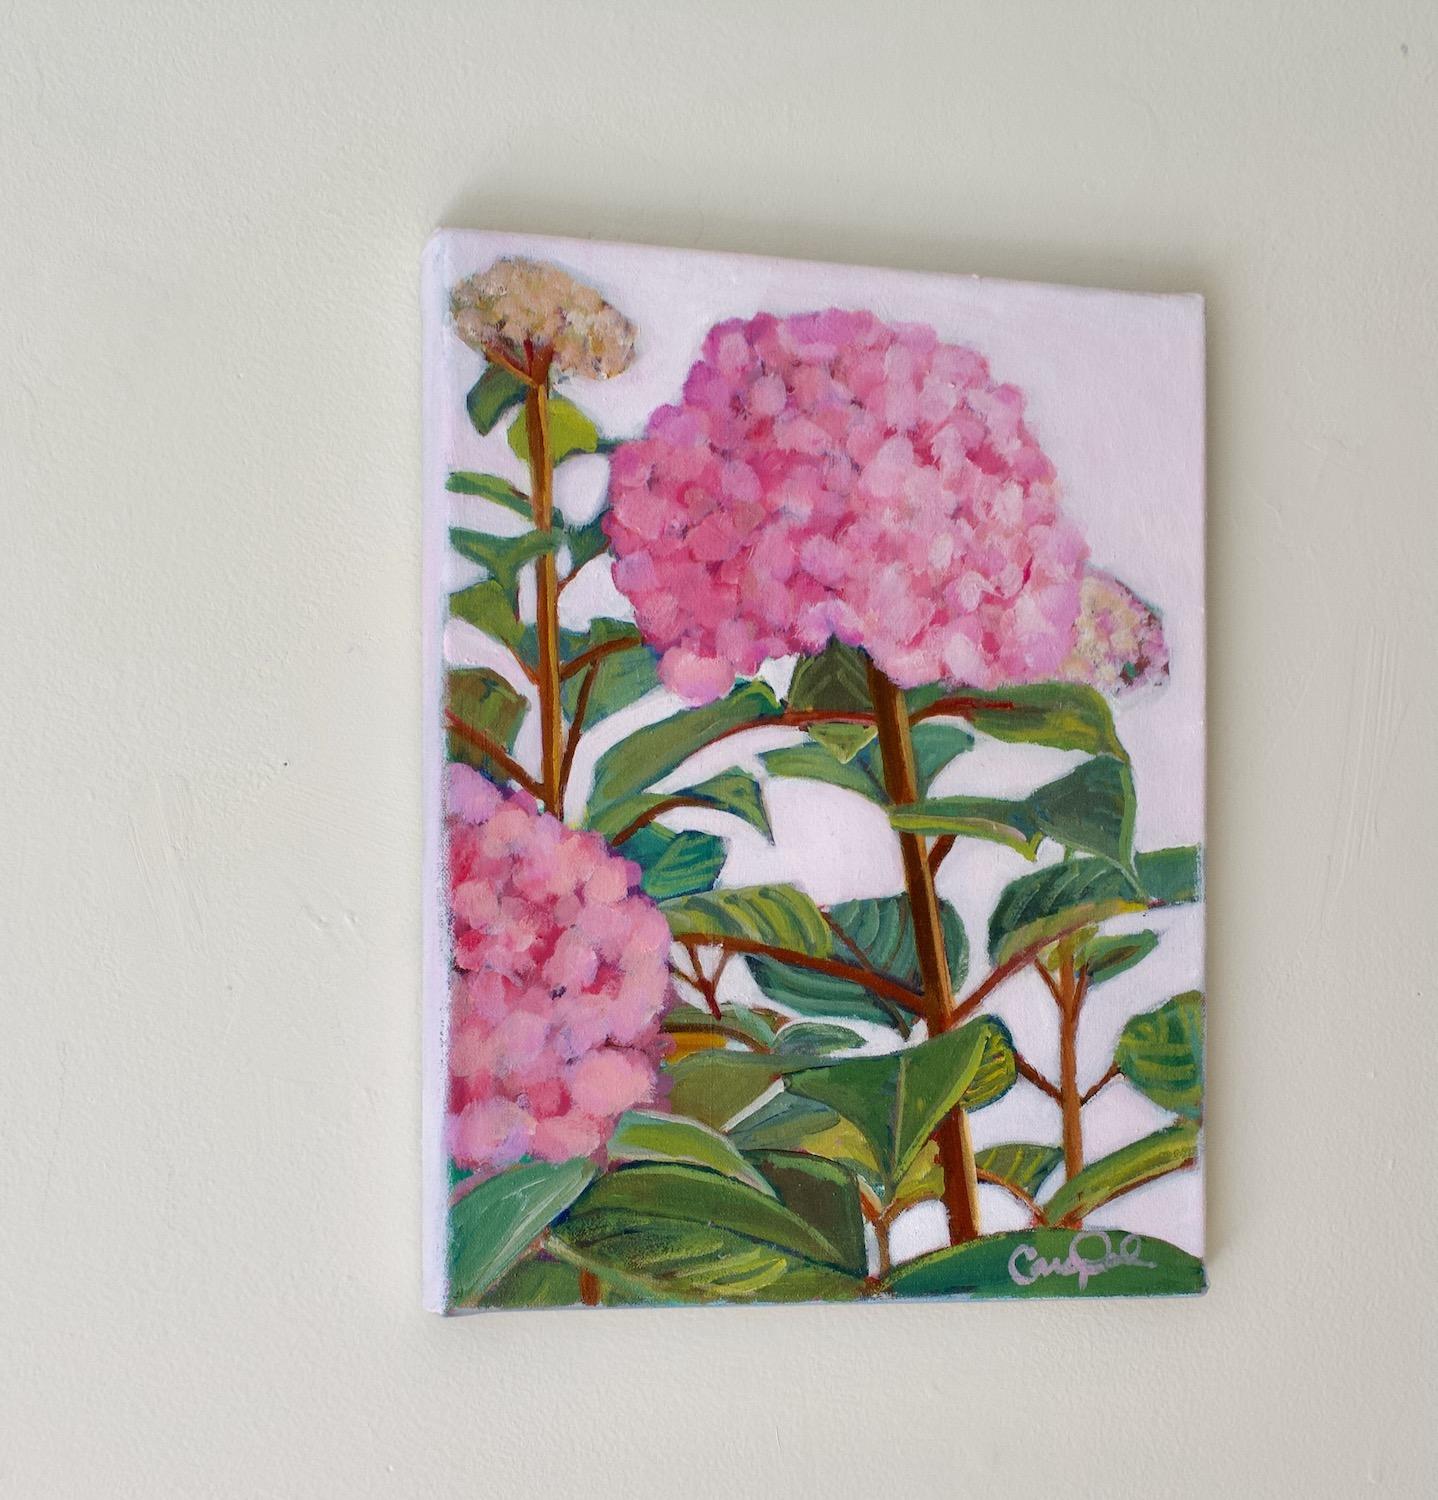 <p>Artist Comments<br>Artist Carey Parks depicts a blooming hydrangea plant. The soft background brings out the delicate pink petals and vibrant green leaves. Carey selects the flowers from her yard and paints them lovingly in her